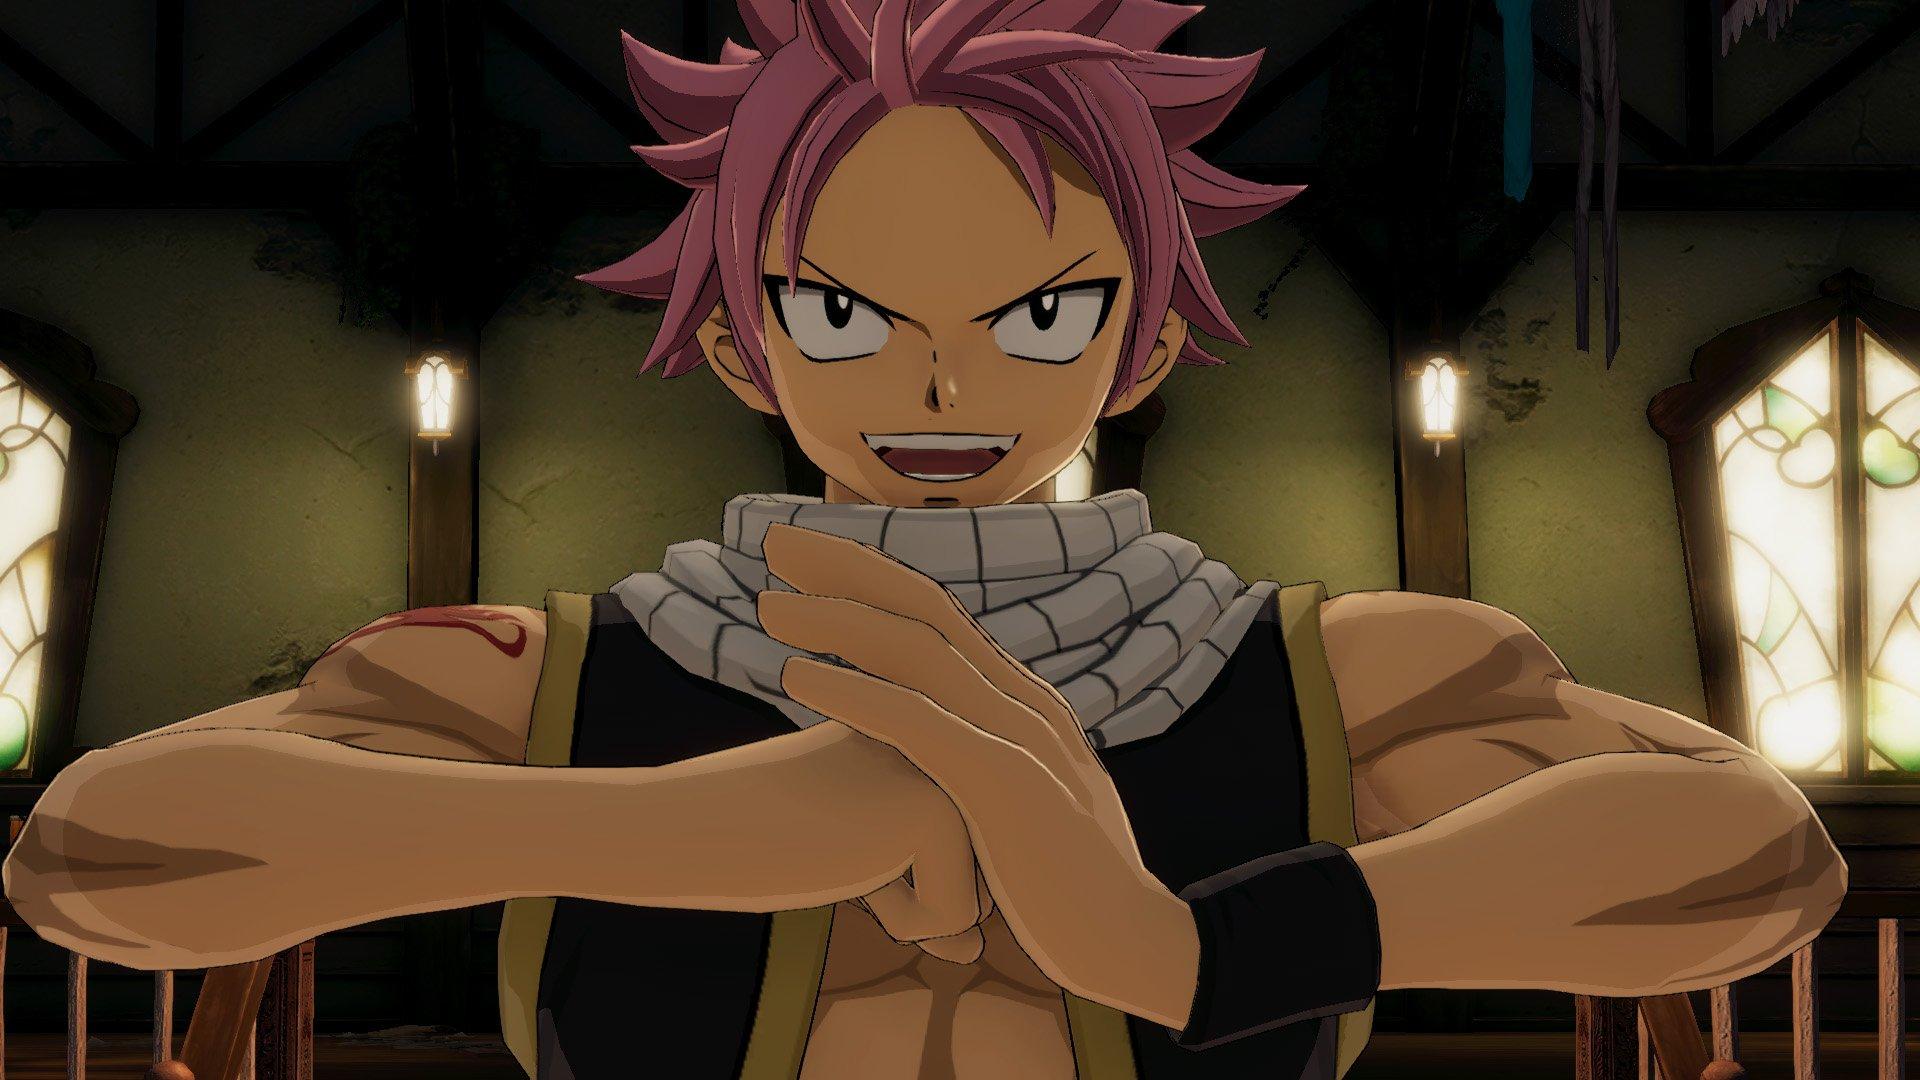 Fairy Tail Articles - Geek, Anime and RPG news